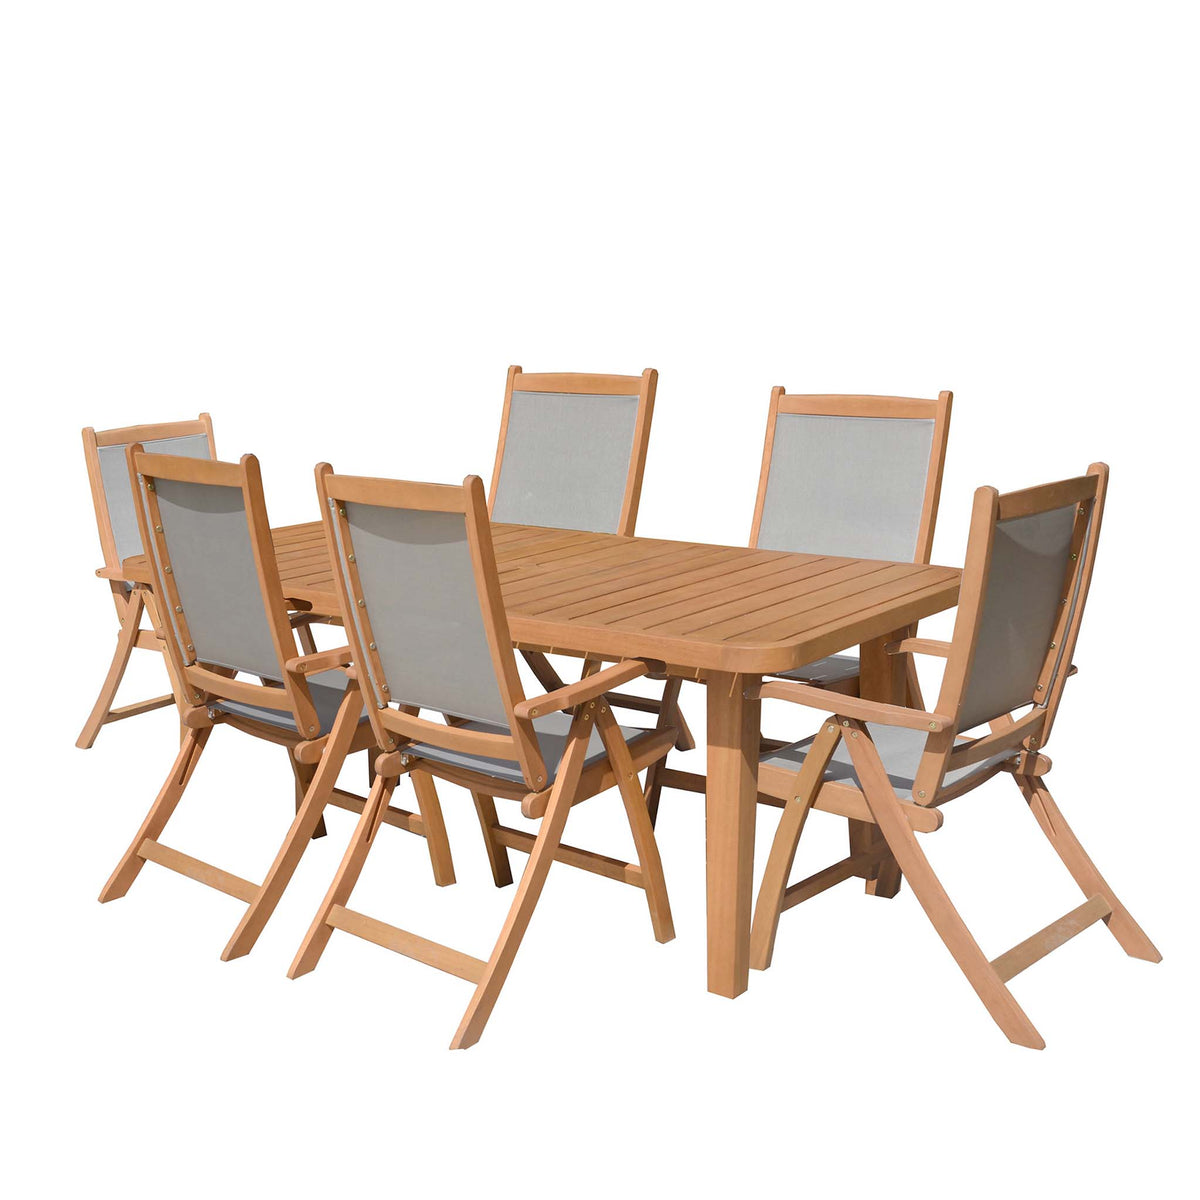 Broadway Acacia Wooden 6 Seat Garden Dining Set with reclining chairs by Roseland Furniture